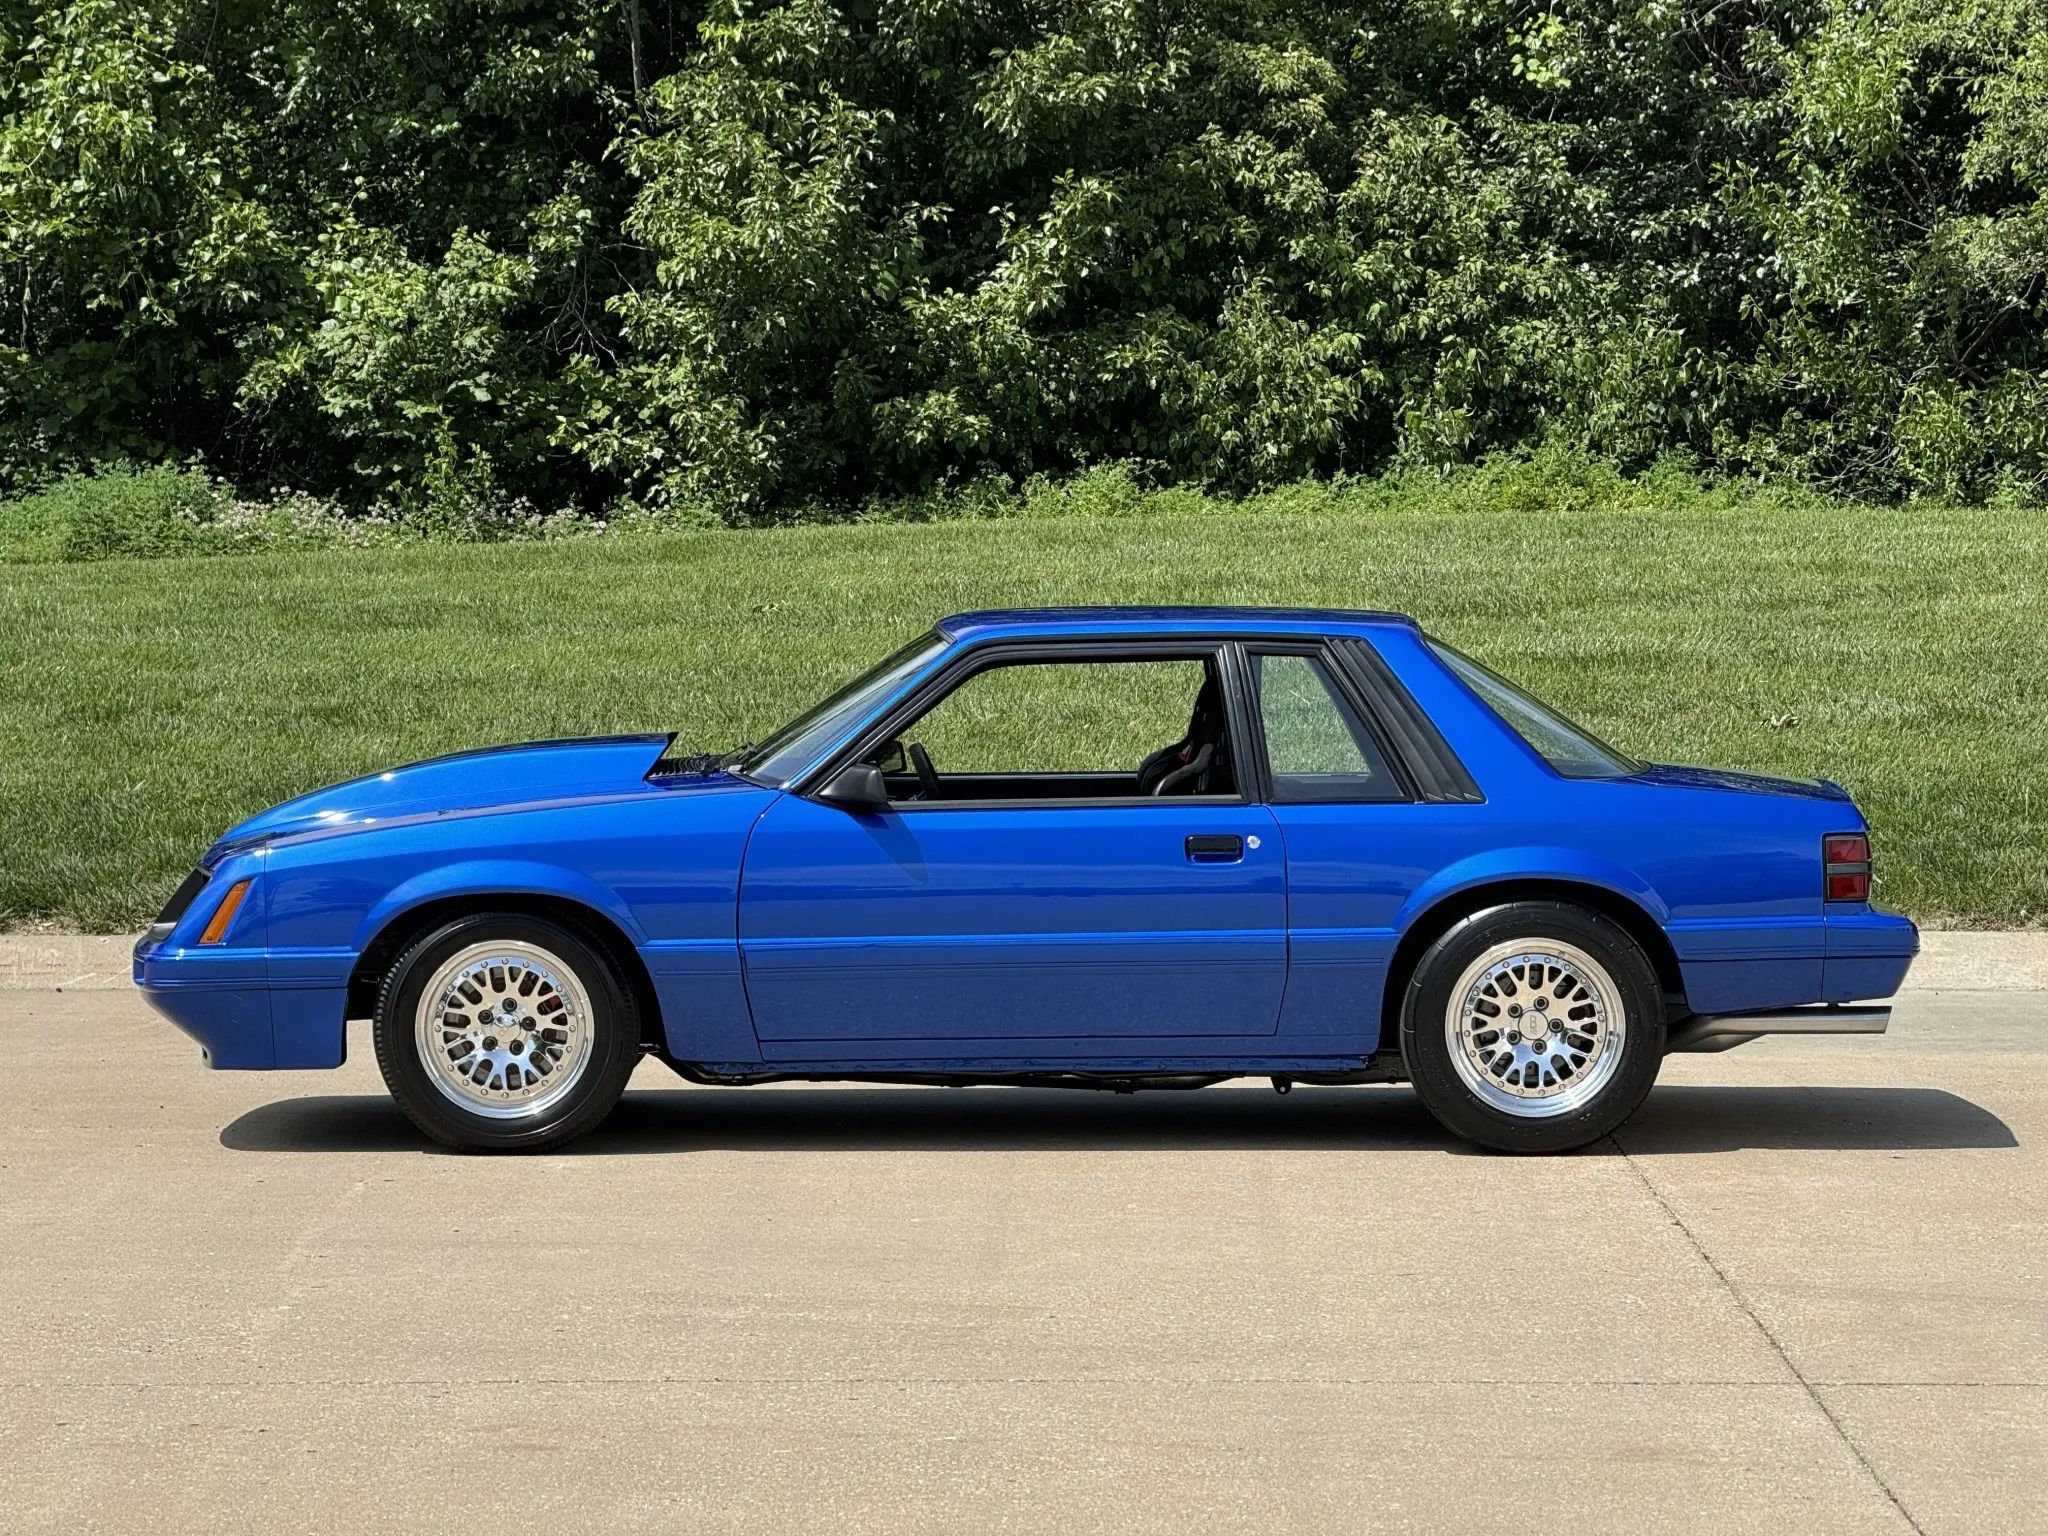 1985 Ford Mustang LX